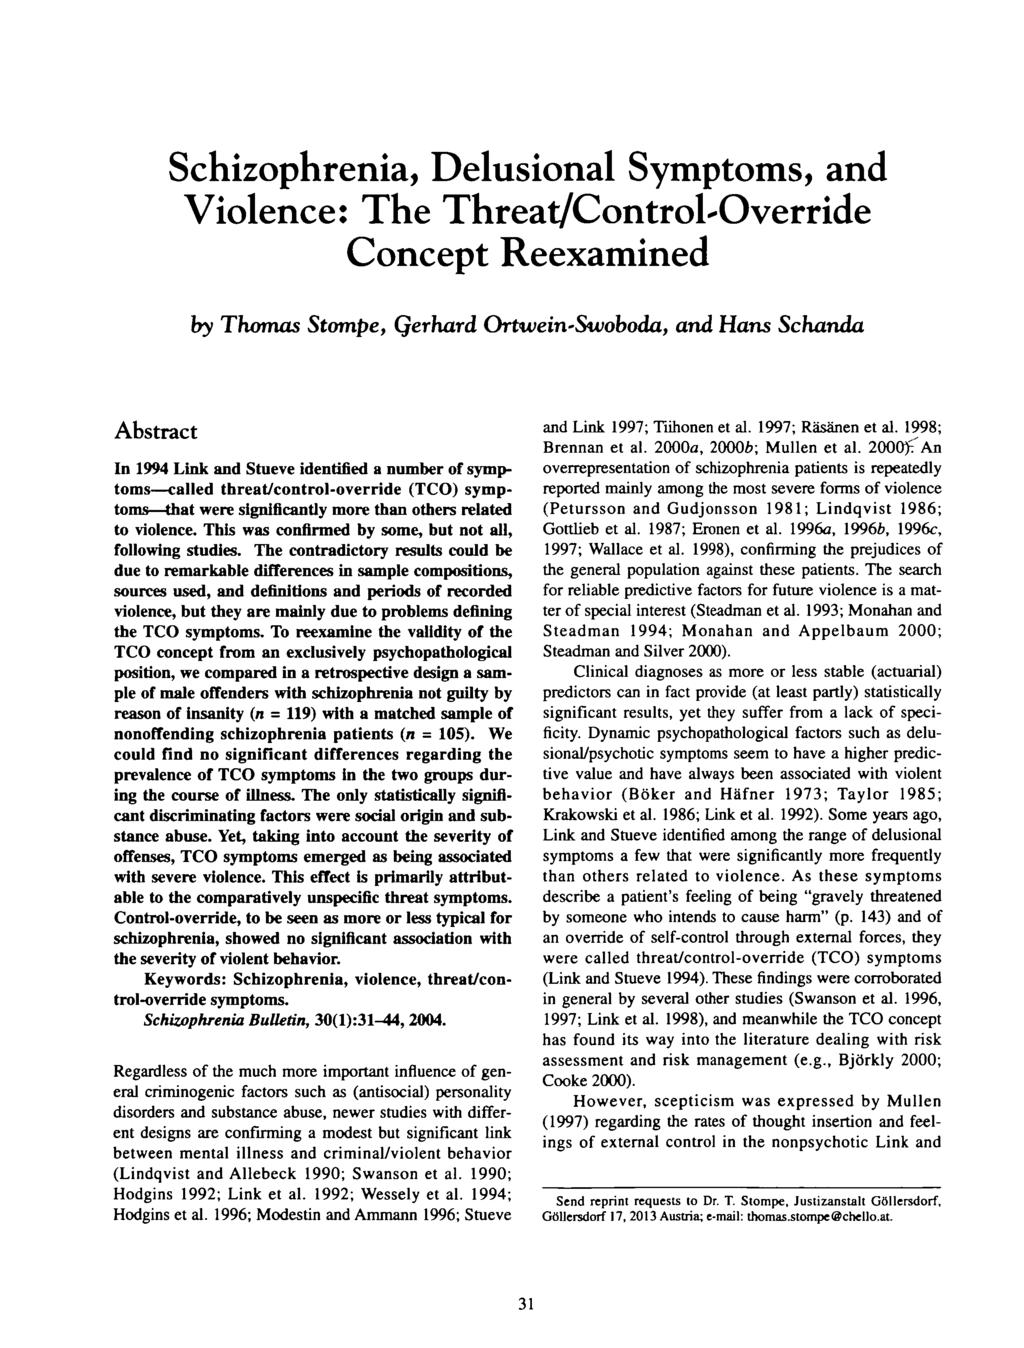 Schizophrenia, Delusional Symptoms, and Violence: The Threat/Control-Override Concept Reexamined by Thomas Stompe, Qerhard Ortwein'Swoboda, and Hans Schanda Abstract In 1994 Link and Stueve